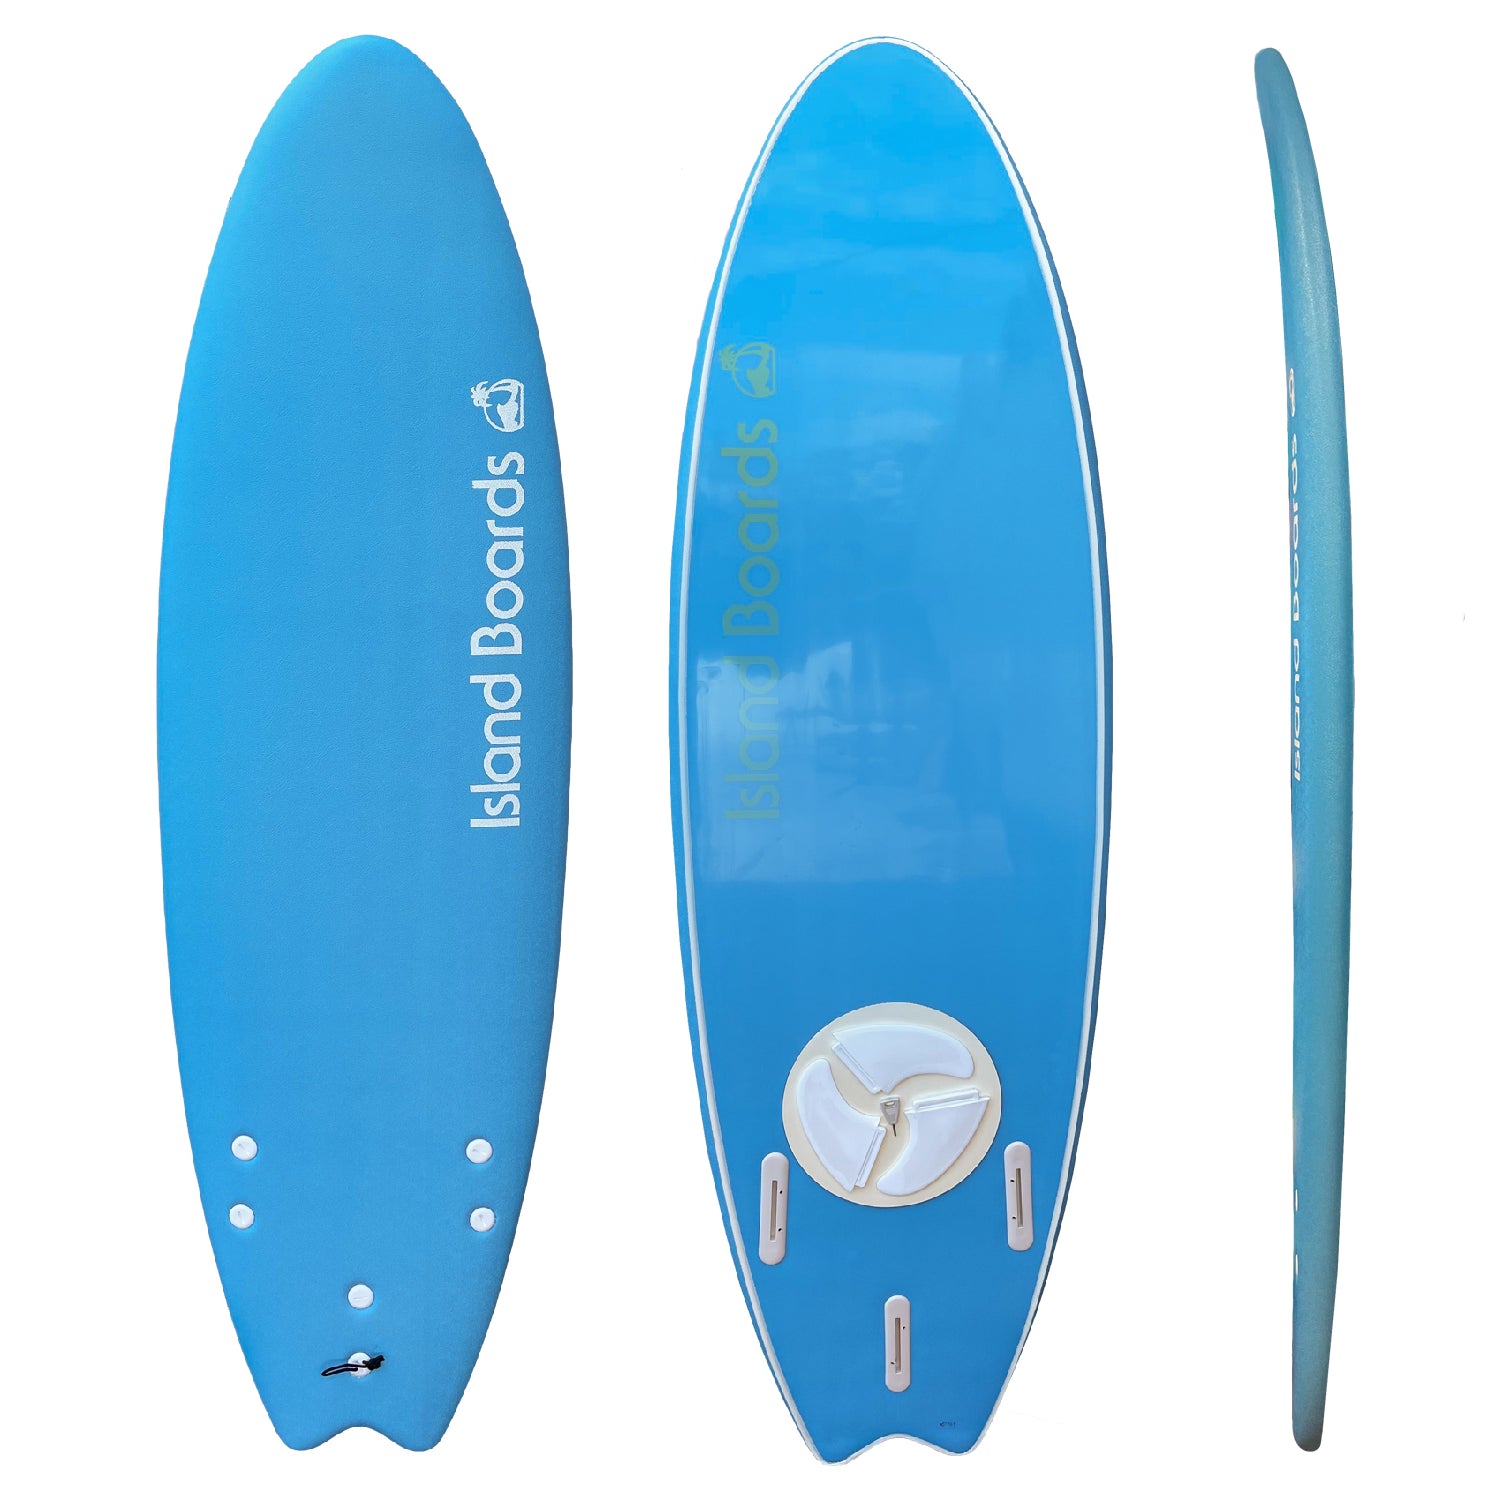 Island Water Sports Swallow Tail Softtop Surfboard Azure Blue-Azure Blue 6ft6in